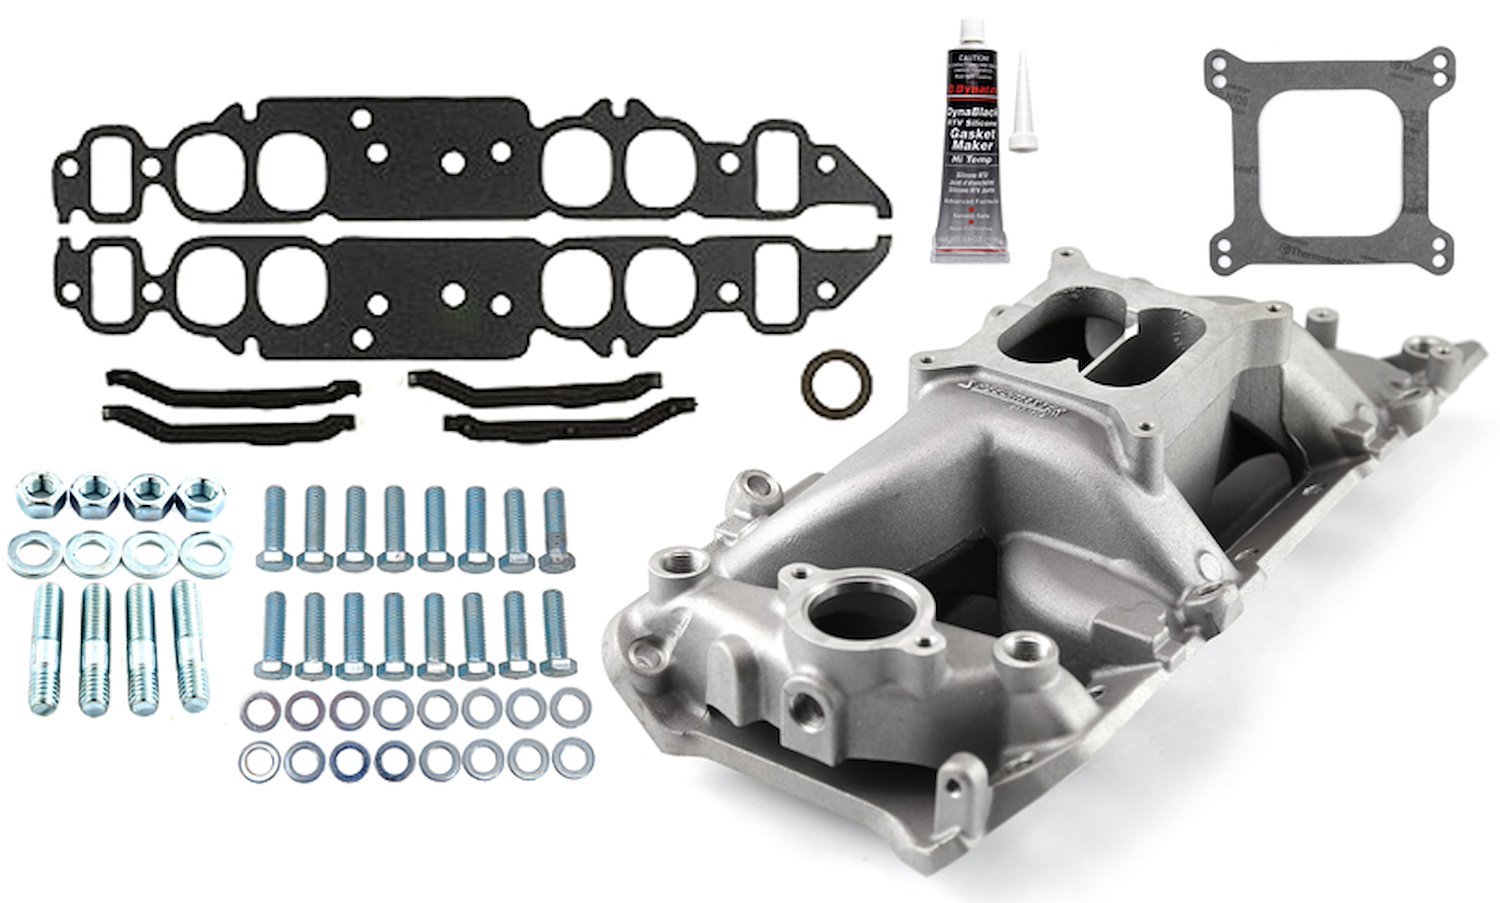 MidRise Intake Manifold Kit for Big Block Chevy 454 Oval Port